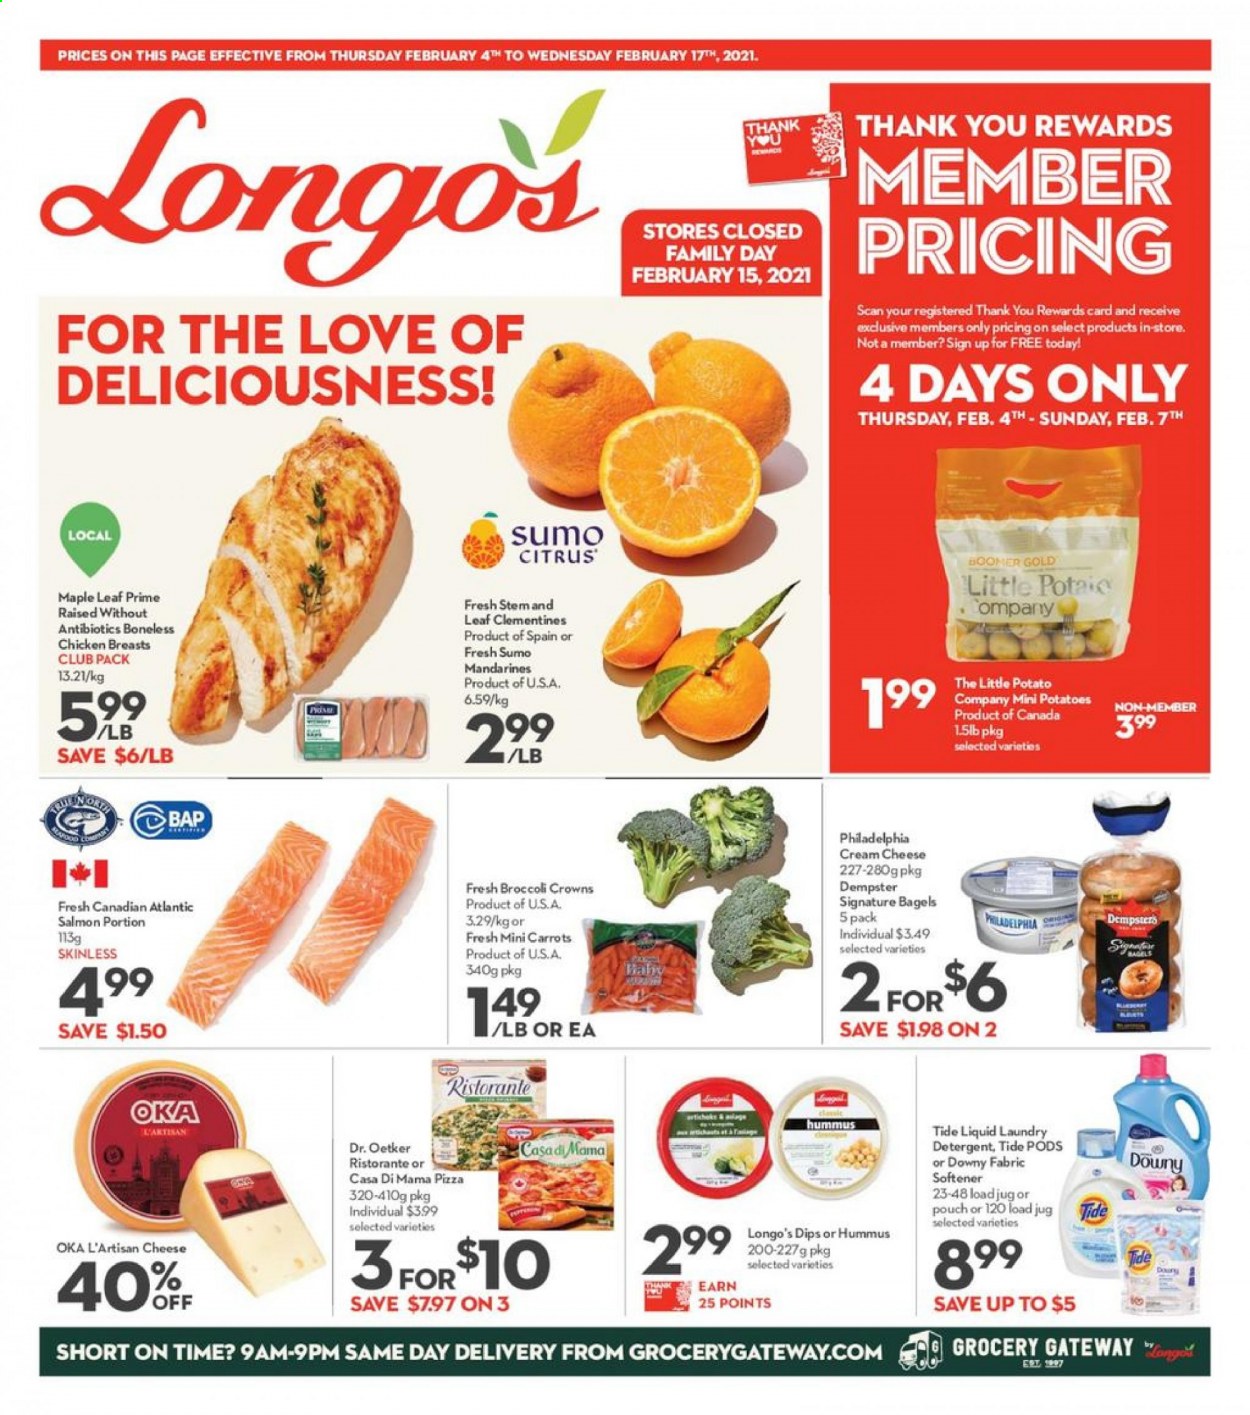 thumbnail - Longo's Flyer - February 04, 2021 - February 17, 2021 - Sales products - bagels, carrots, potatoes, clementines, mandarines, sumo citrus, salmon, pizza, hummus, Dr. Oetker, chicken breasts, Tide, fabric softener, laundry detergent, Downy Laundry. Page 1.